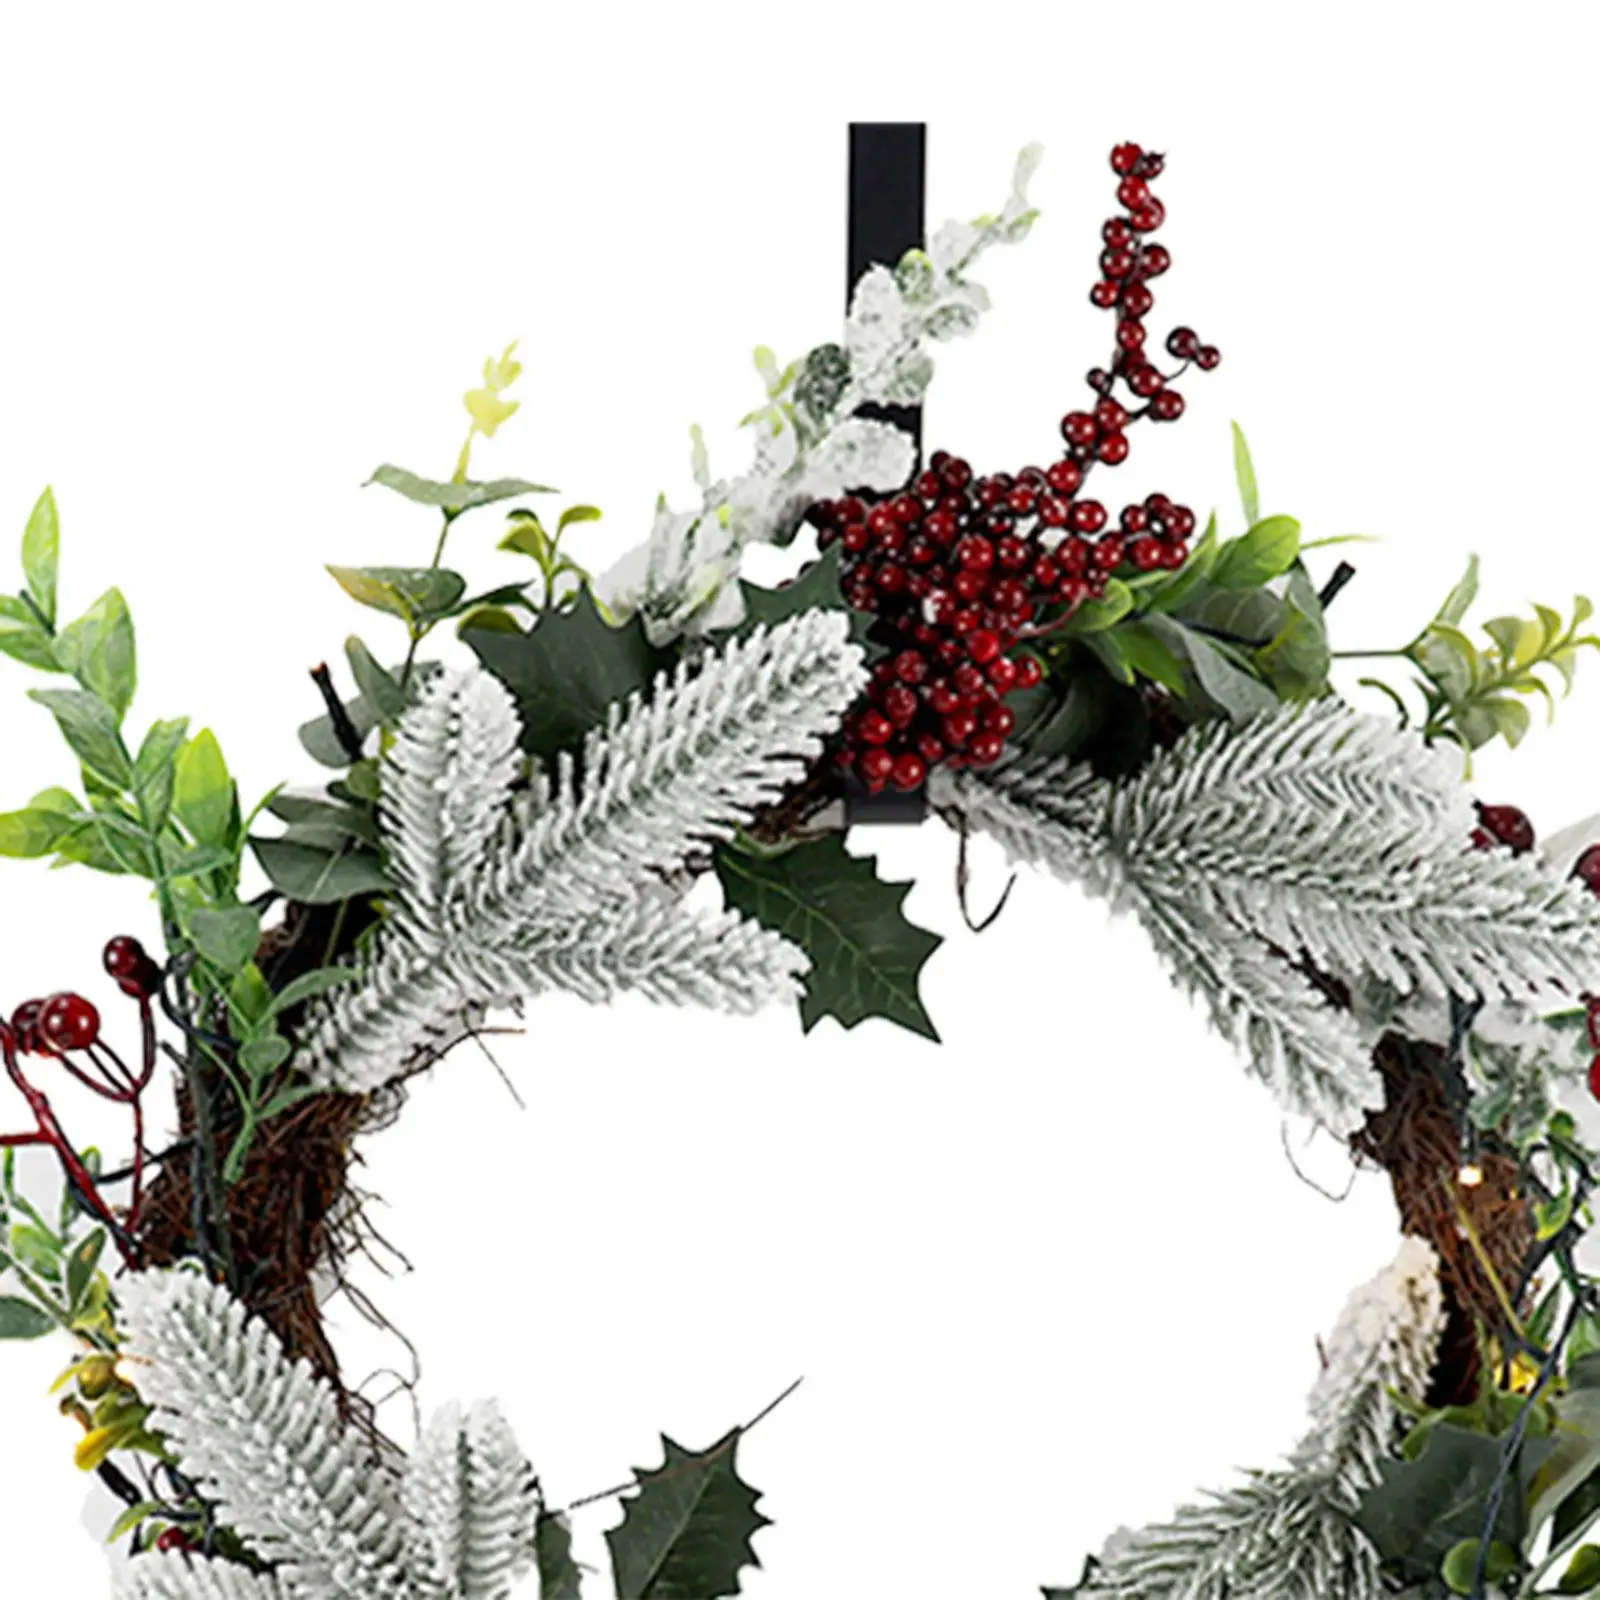 Christmas Wreath 45cm Creative Hanging Decoration Artificial Red Berries Wreath for Wedding Dining Table Festival Holiday Party